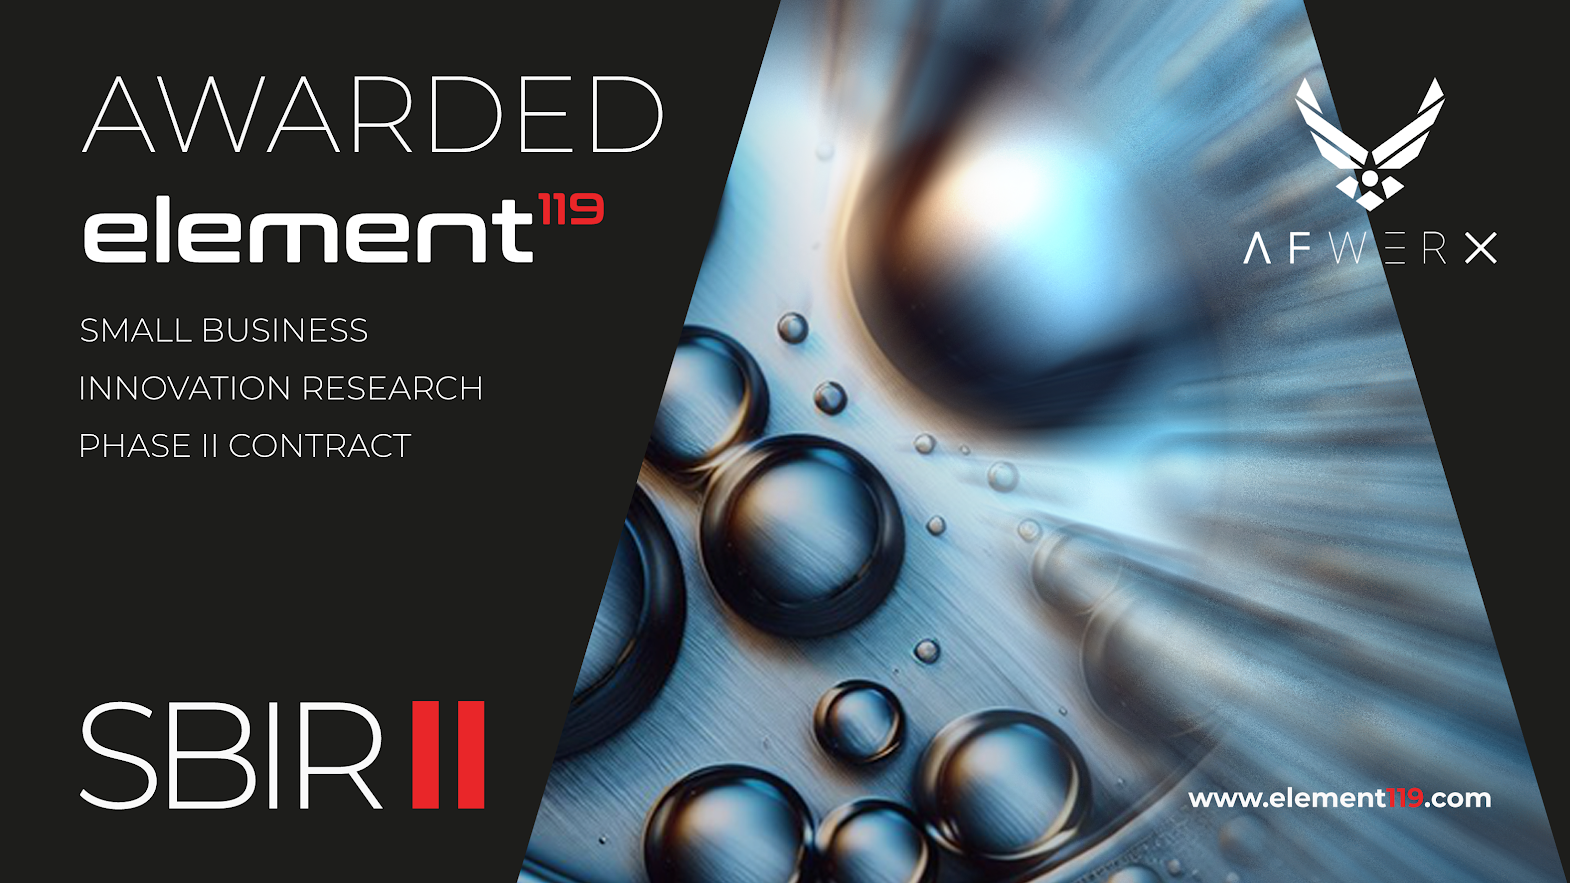 Element119 Awarded Small Business Innovation Research Phase II Contract SBIR